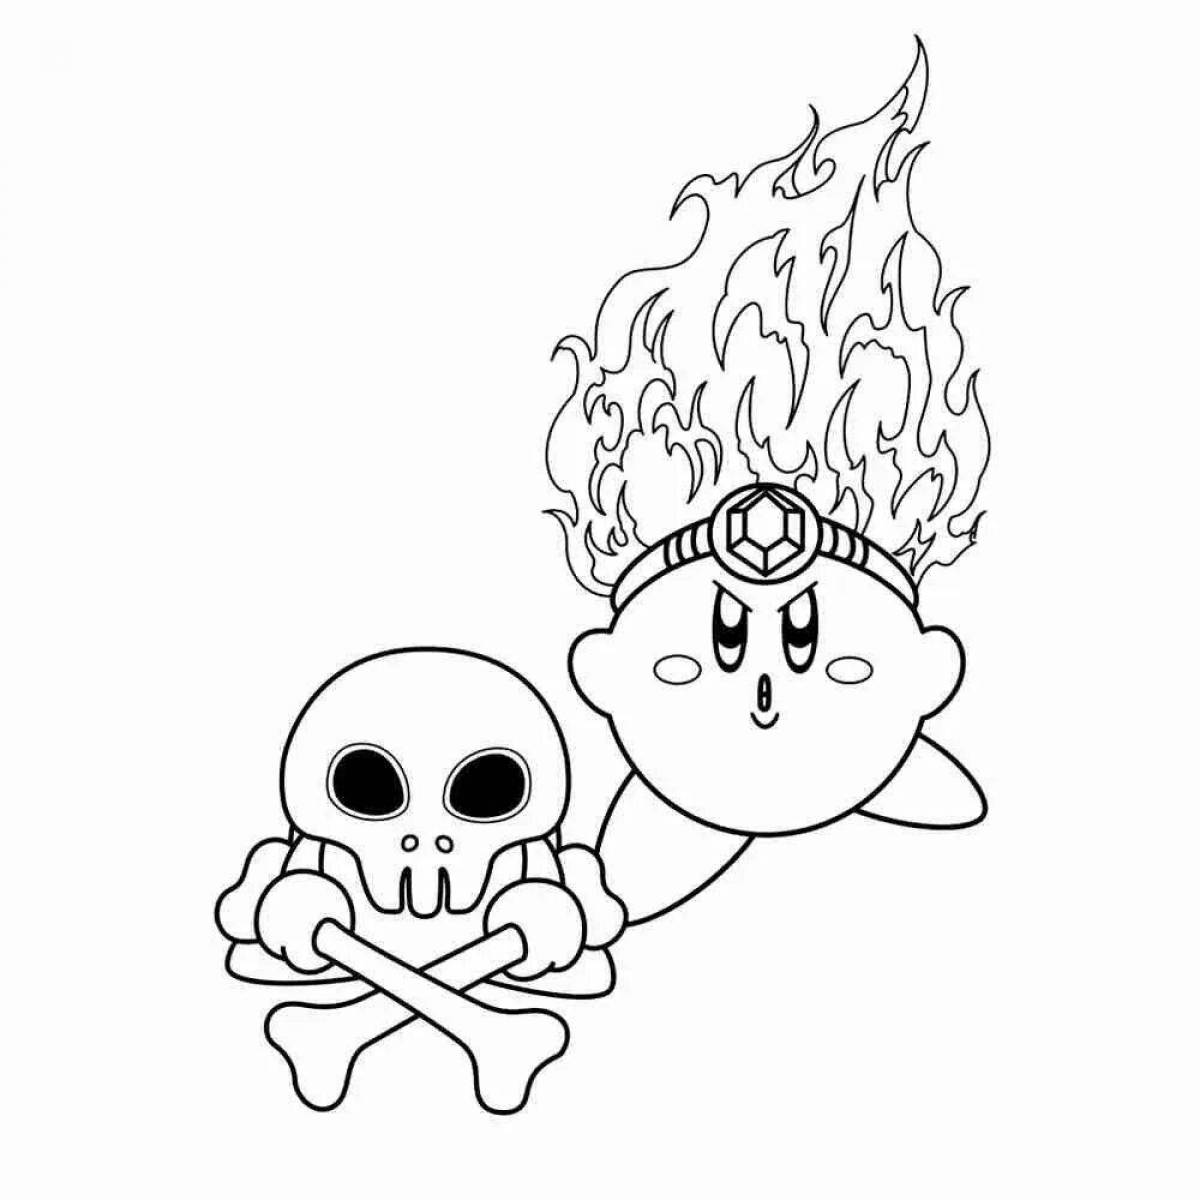 Coloring book flaming fire and water